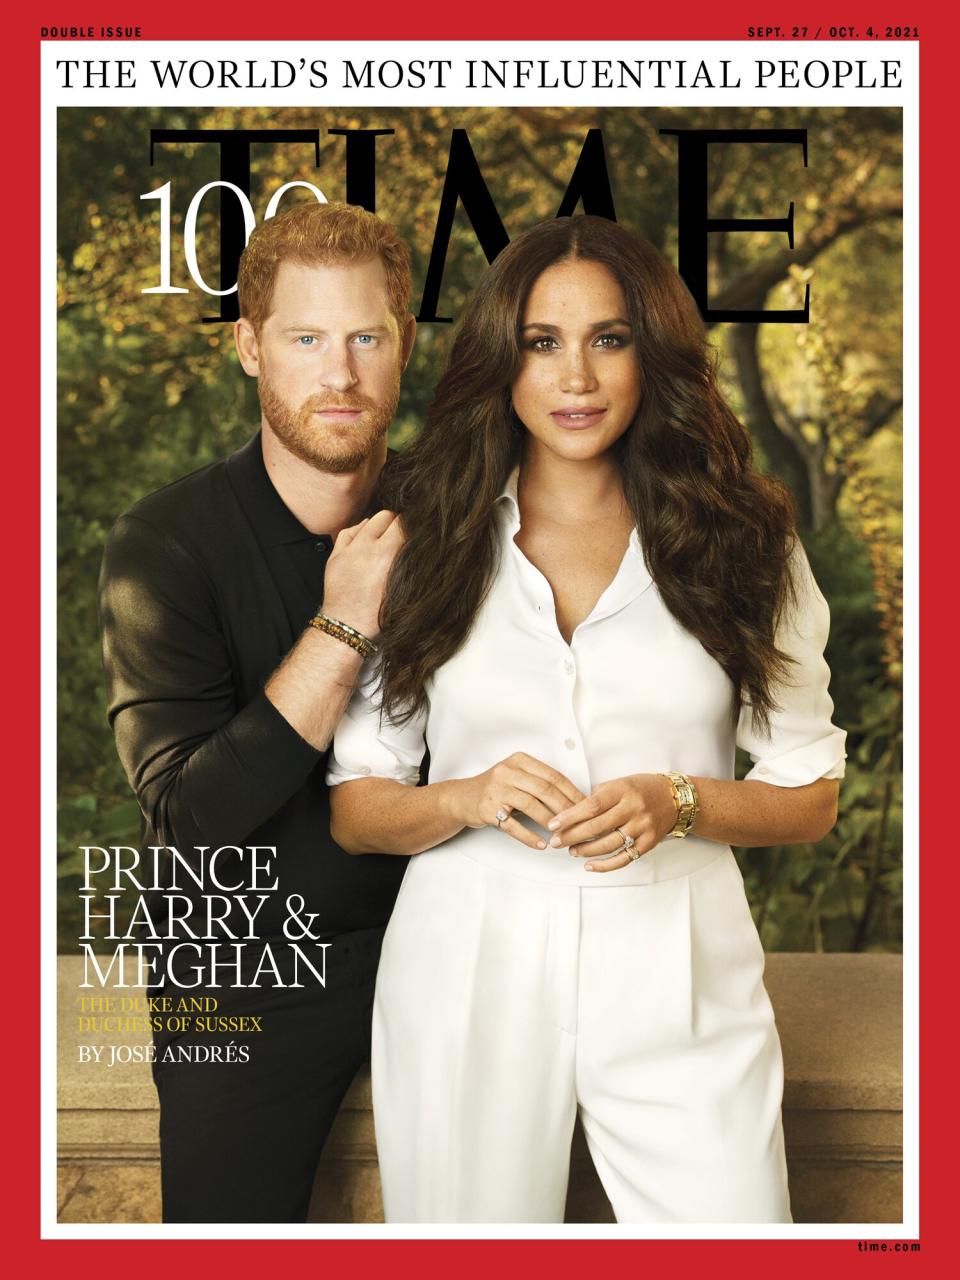 The TIME cover portrait featuring Prince Harry and Meghan